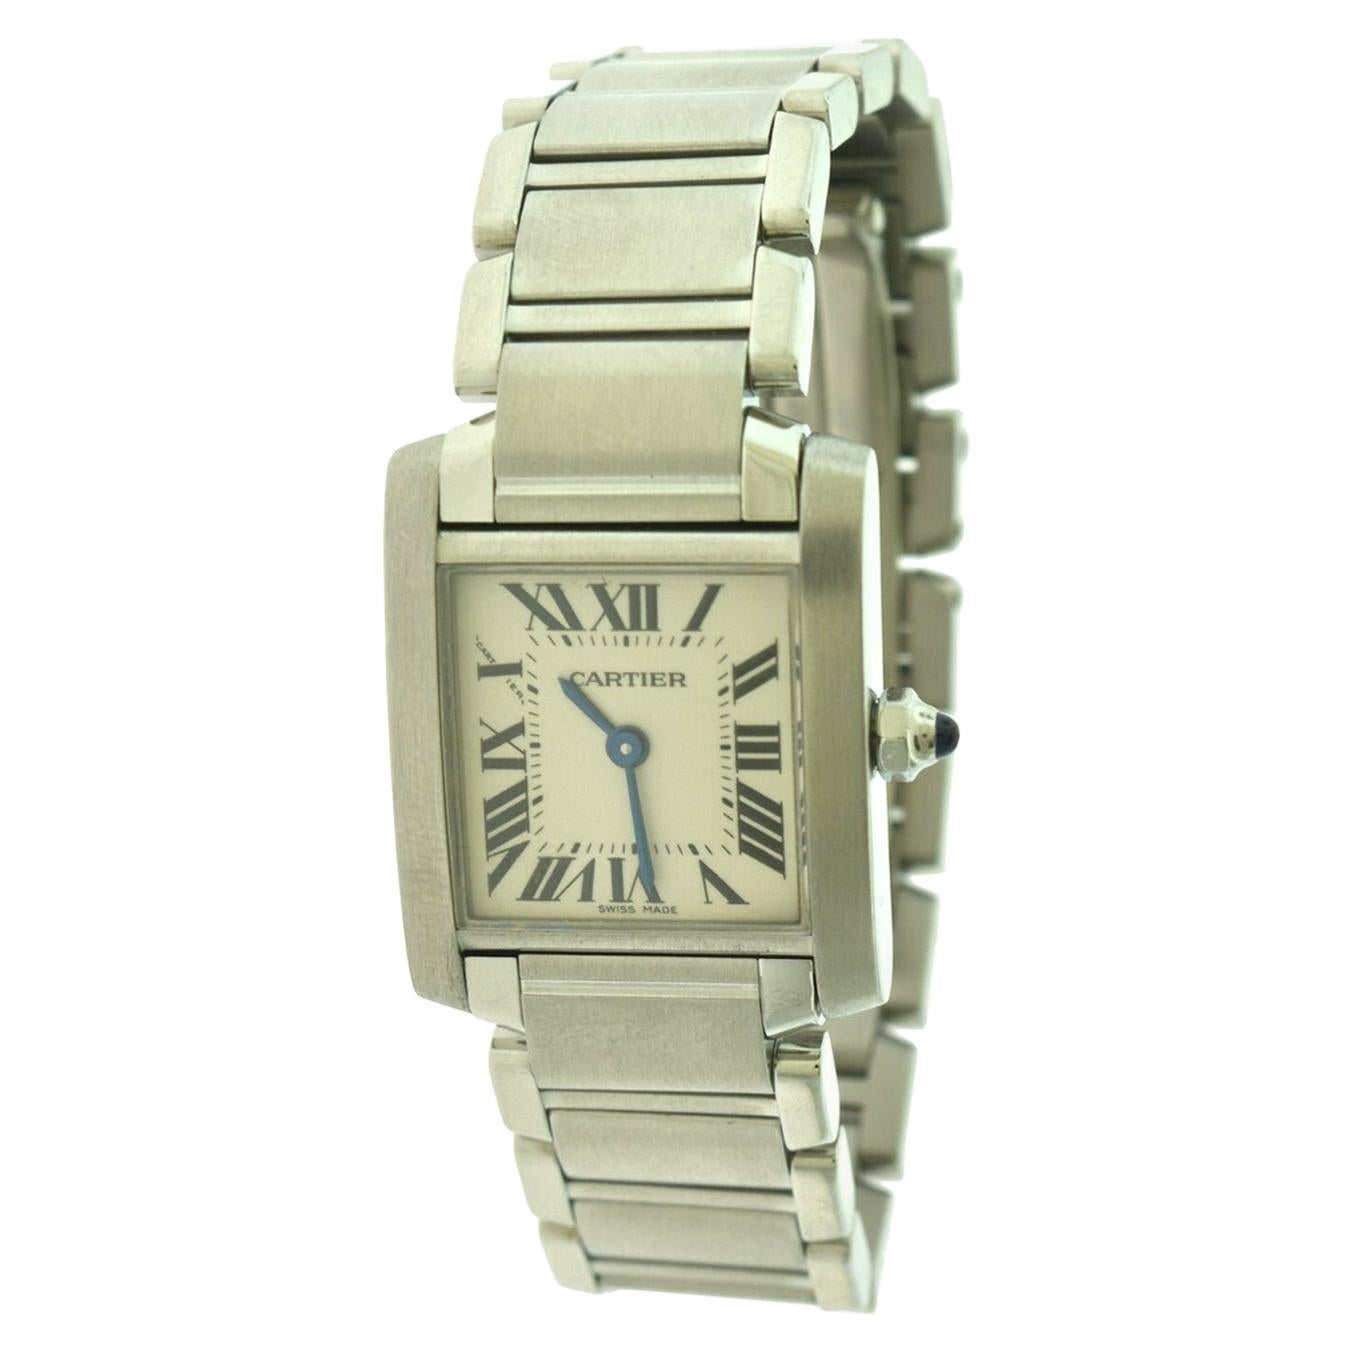 Cartier Tank Francaise Ref. 2384 Small Model Stainless Steel Watch 'Y-33'